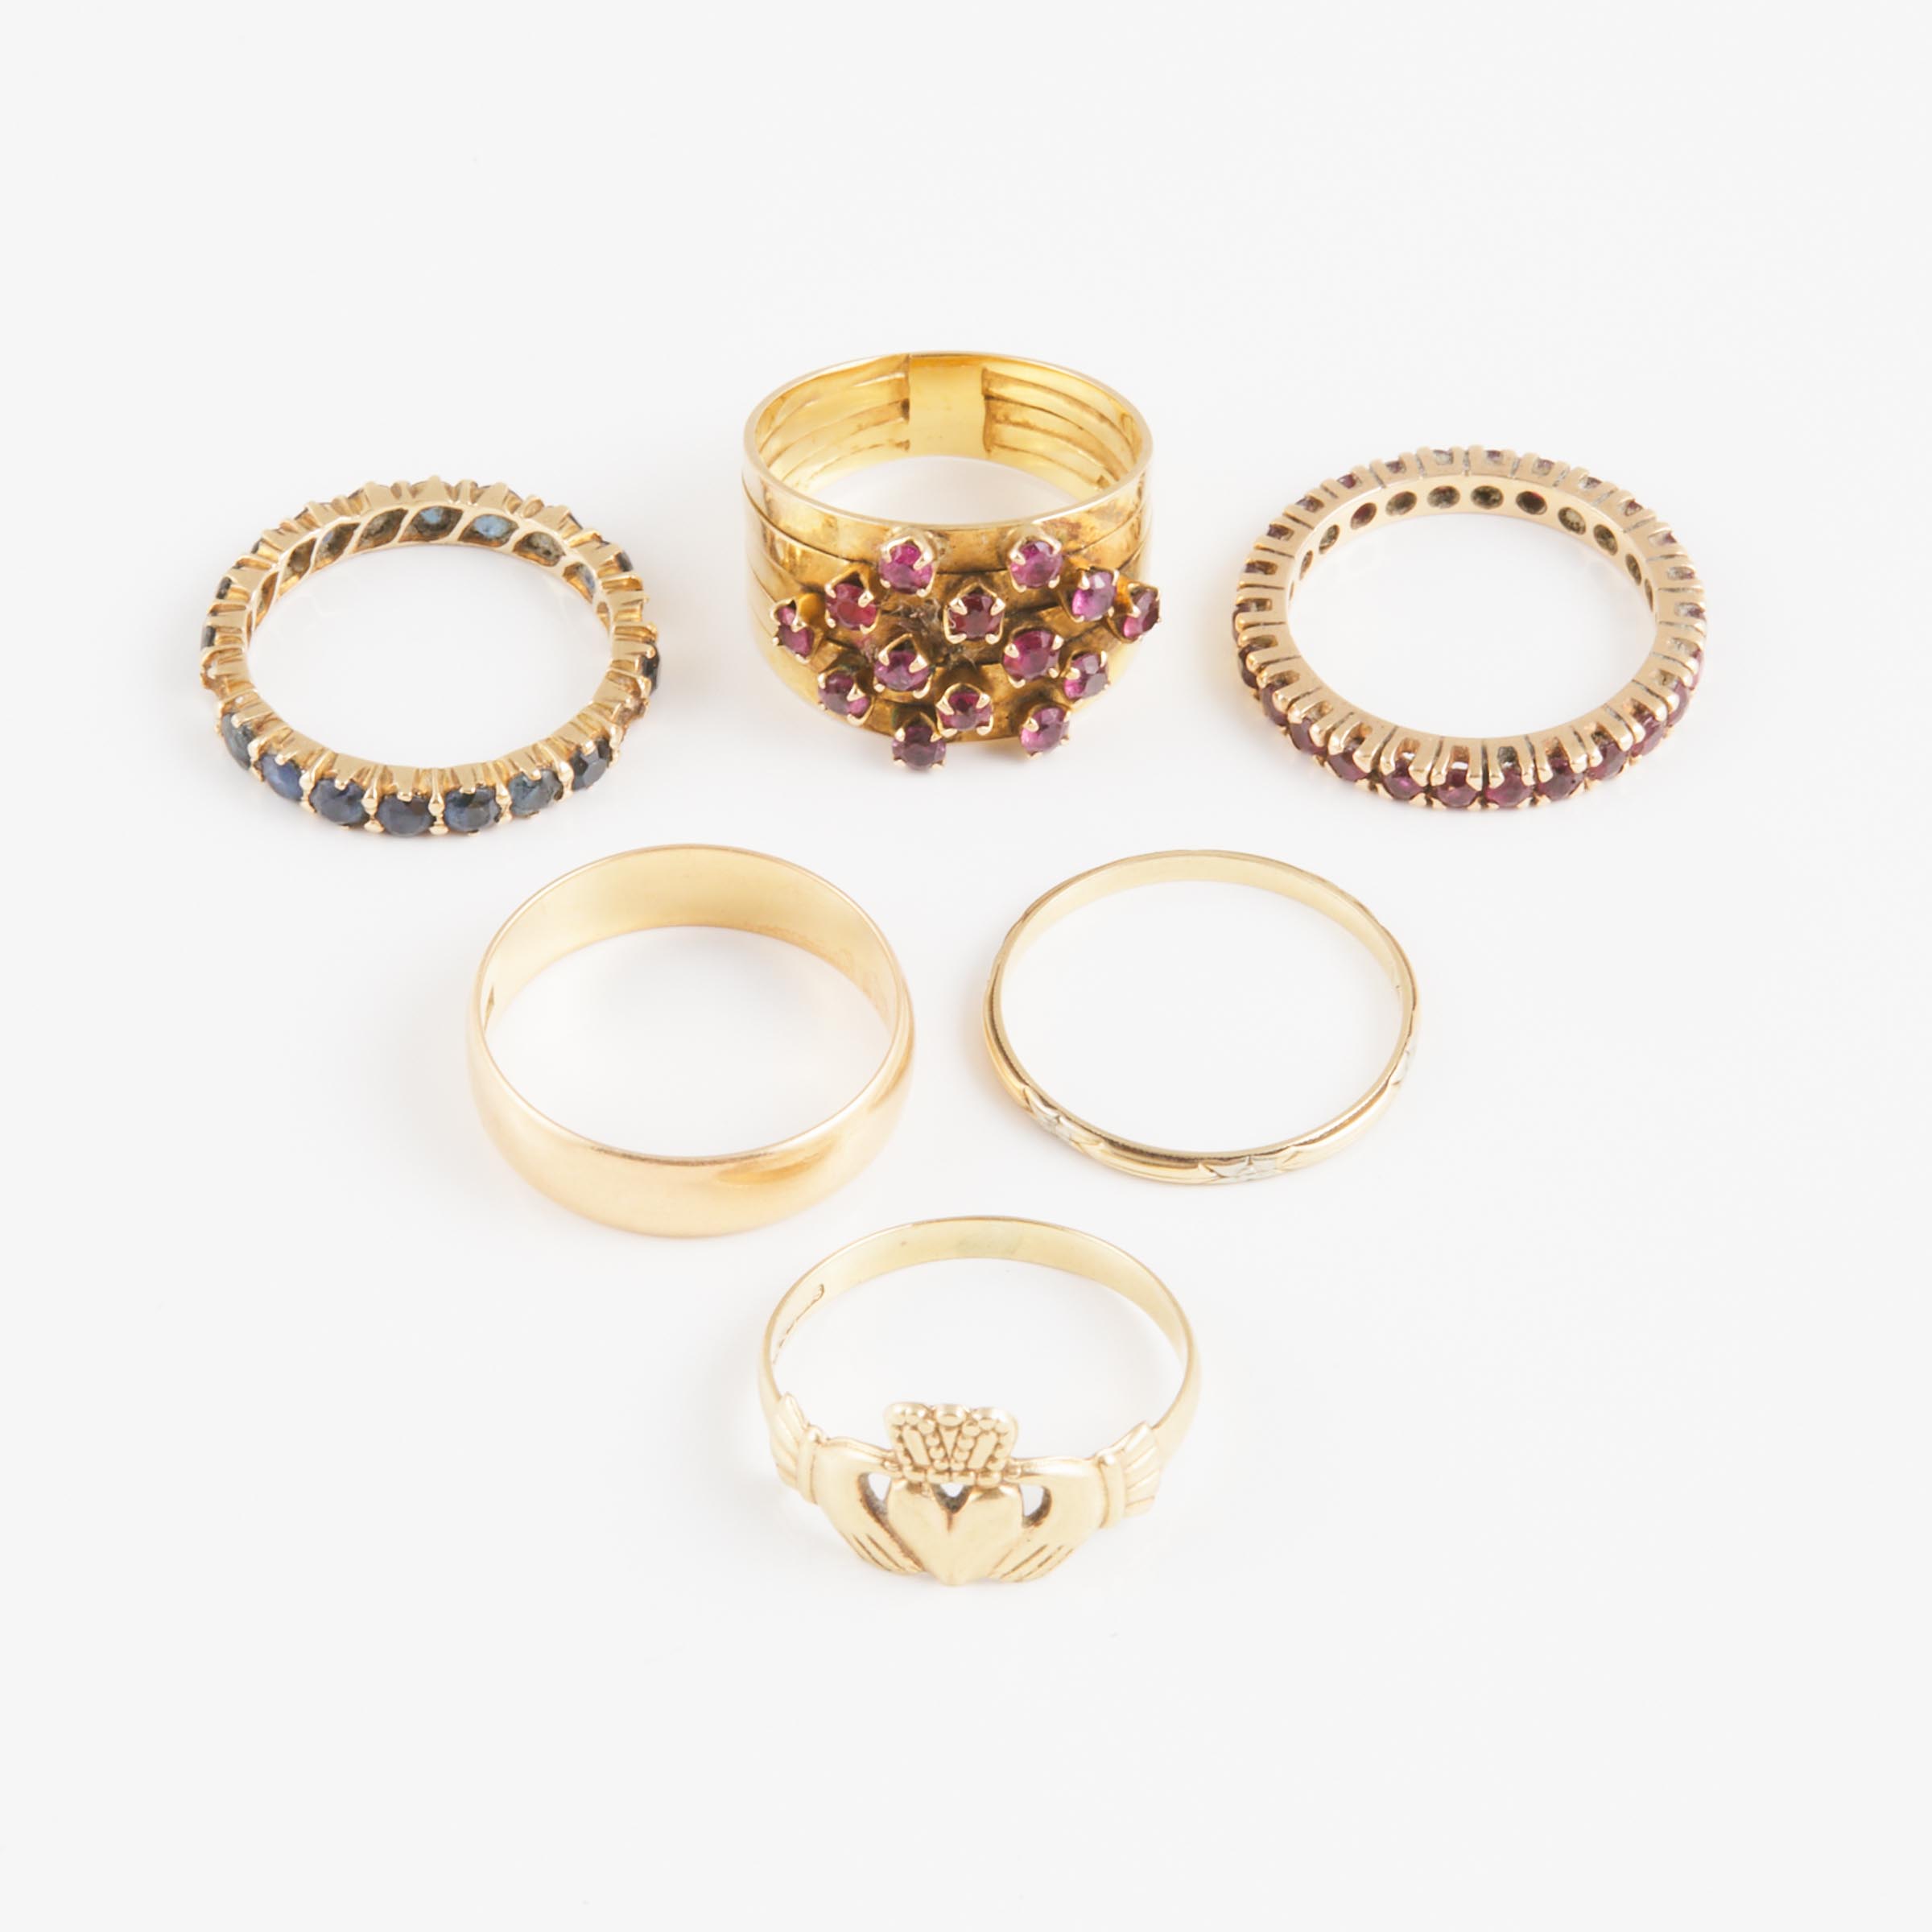 6 Yellow Gold Rings